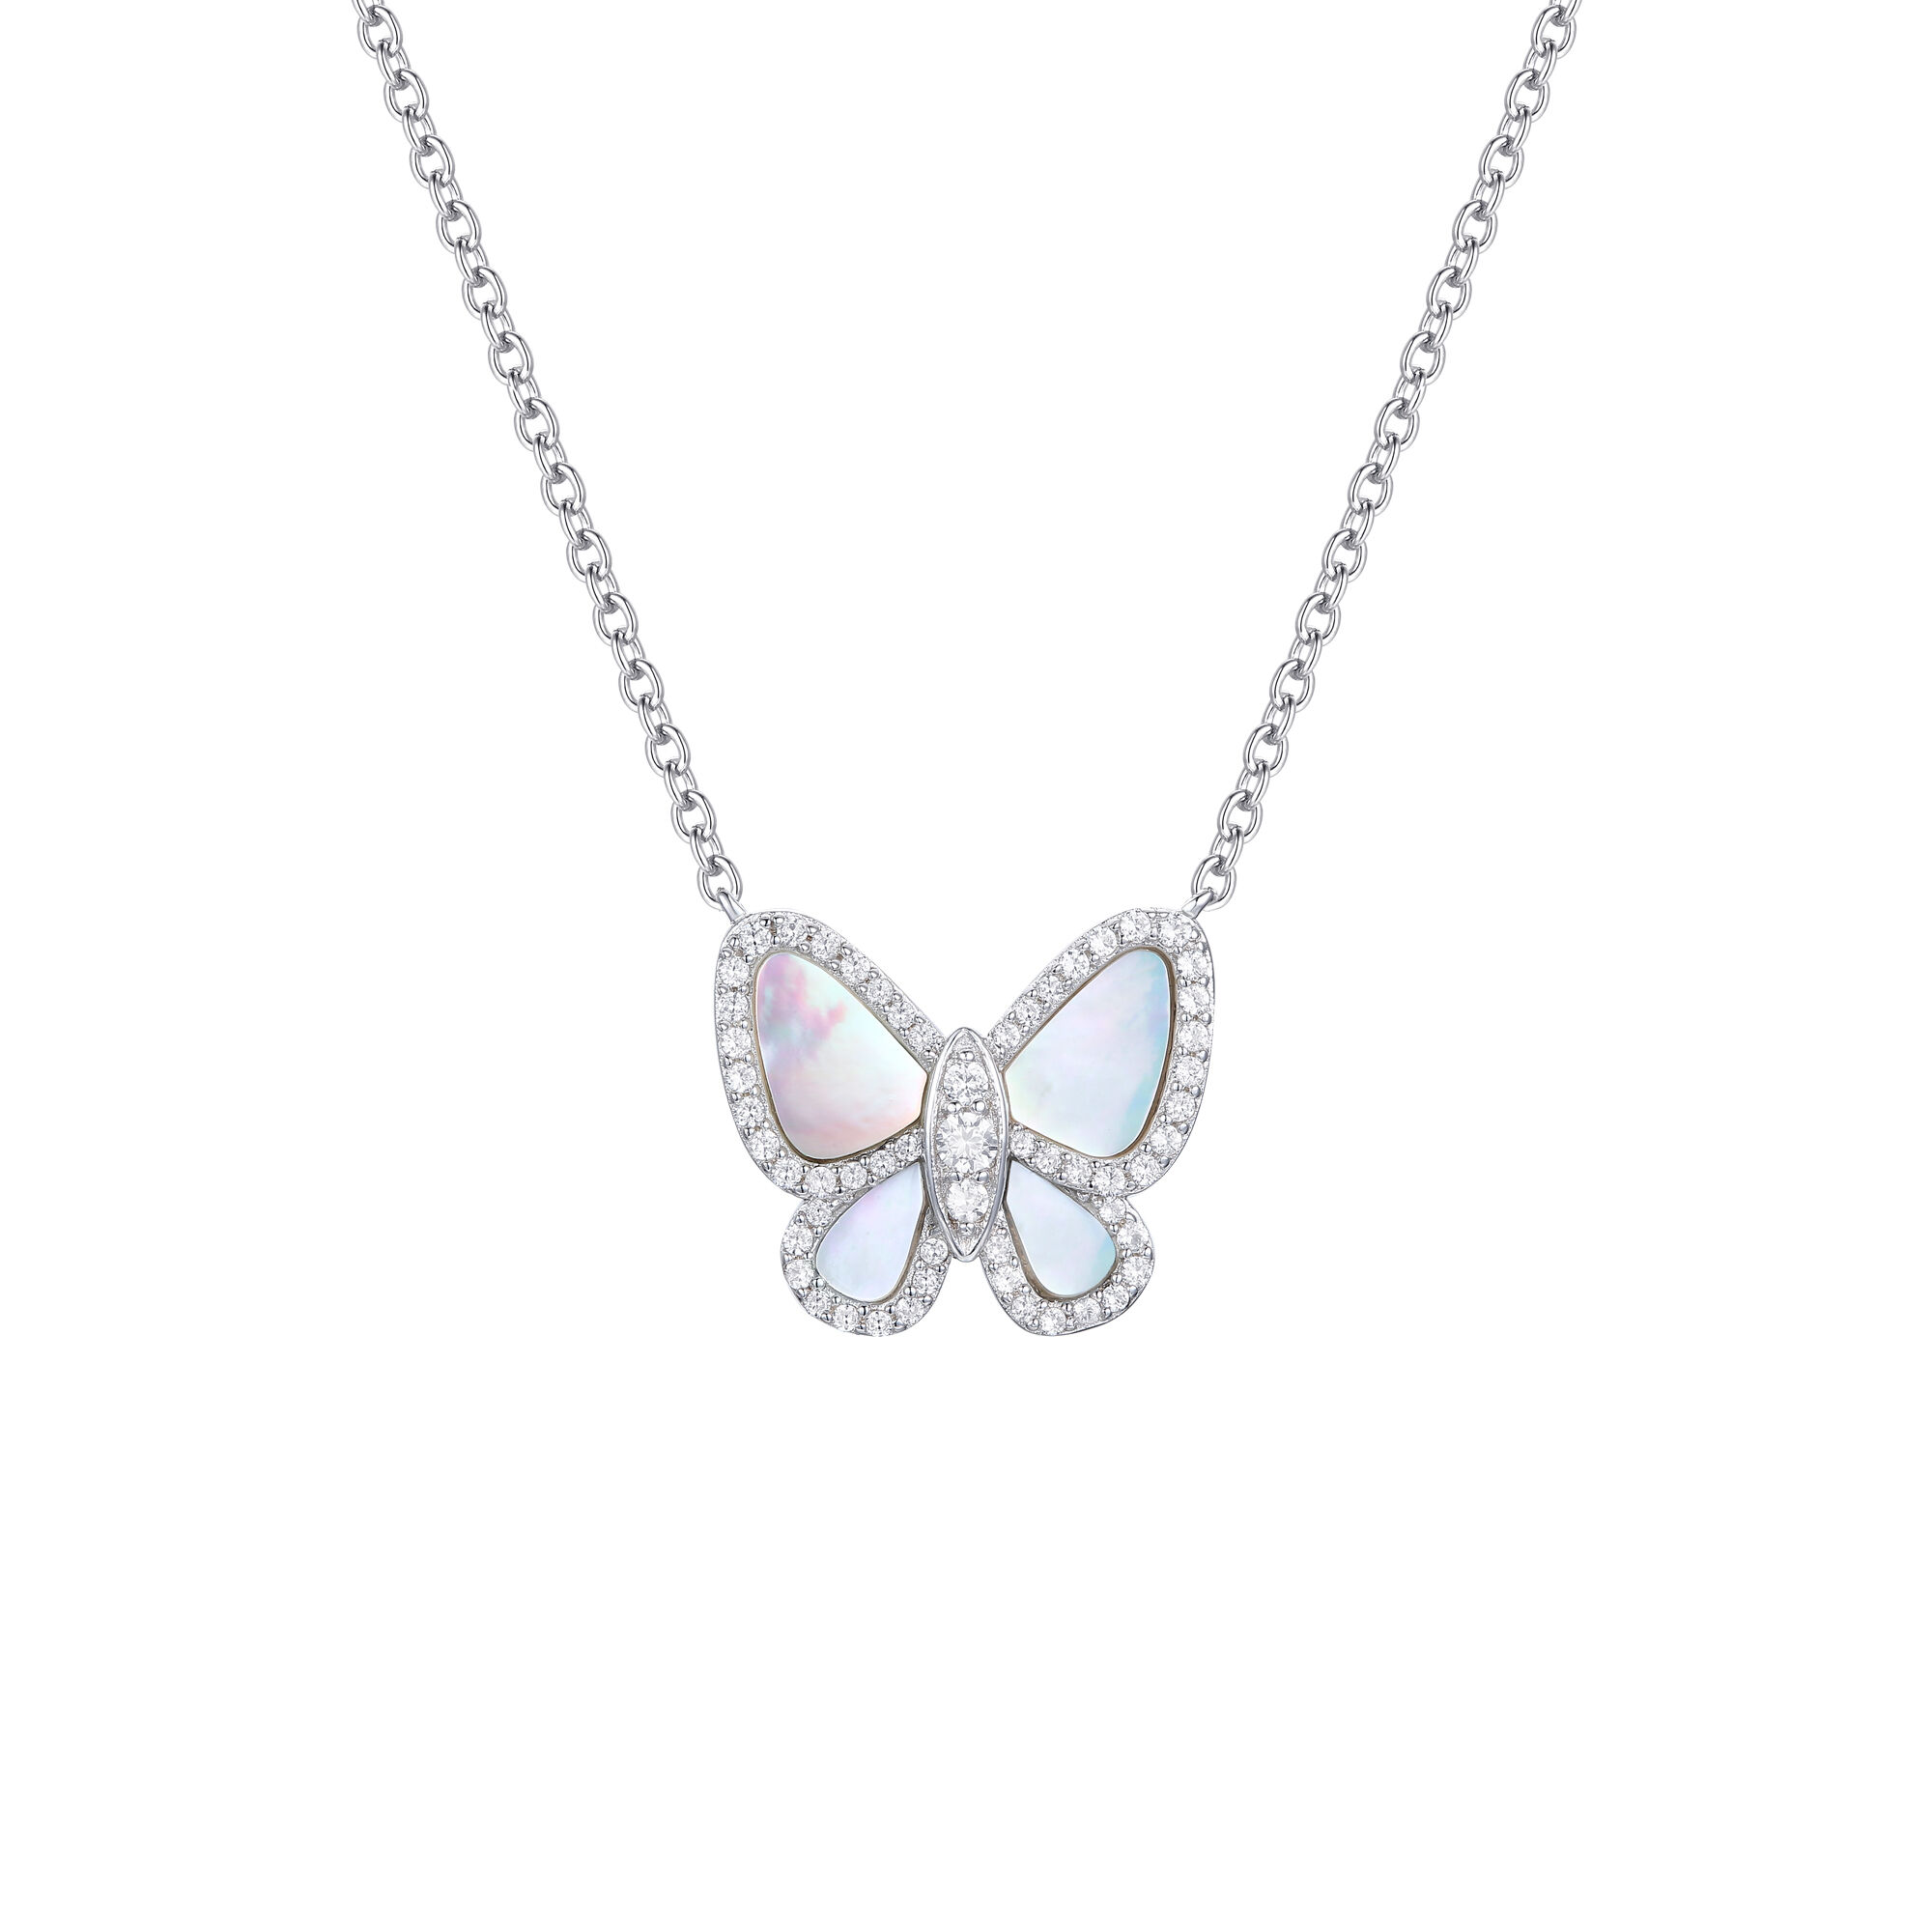 Fancy Butterfly Chain Link Necklace by Niscka - Silver Necklace